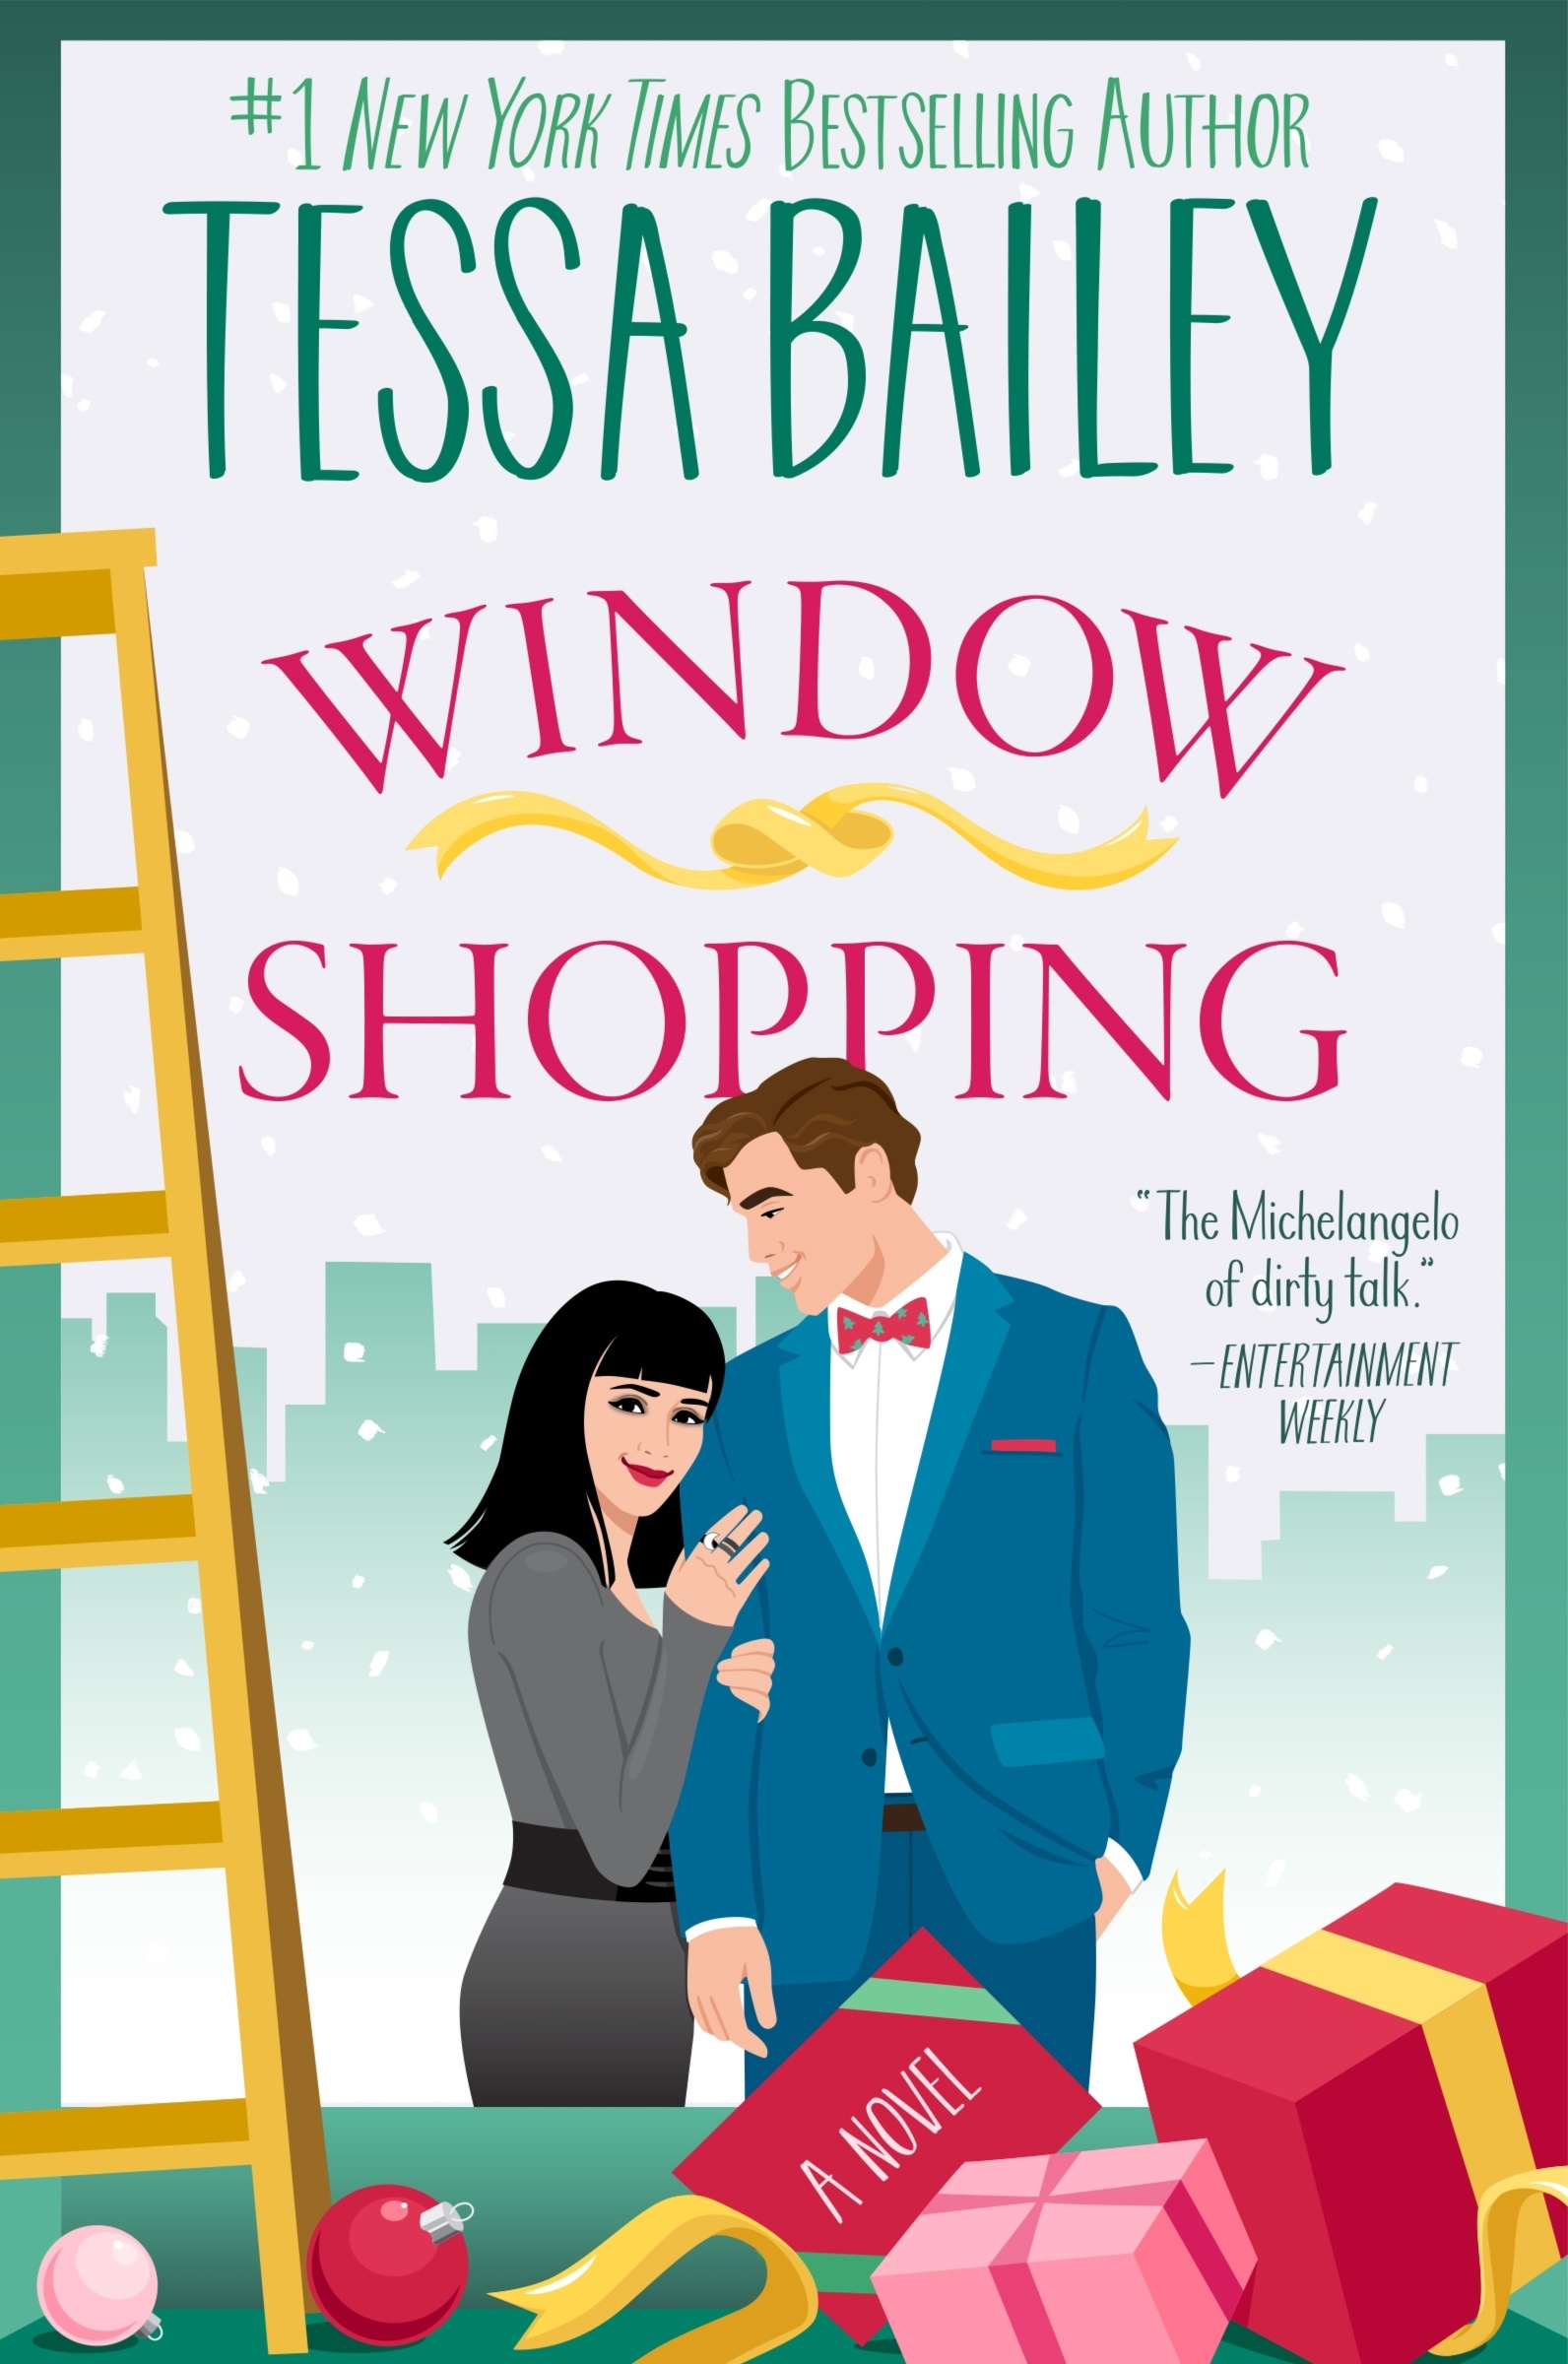 Window Shopping cover image